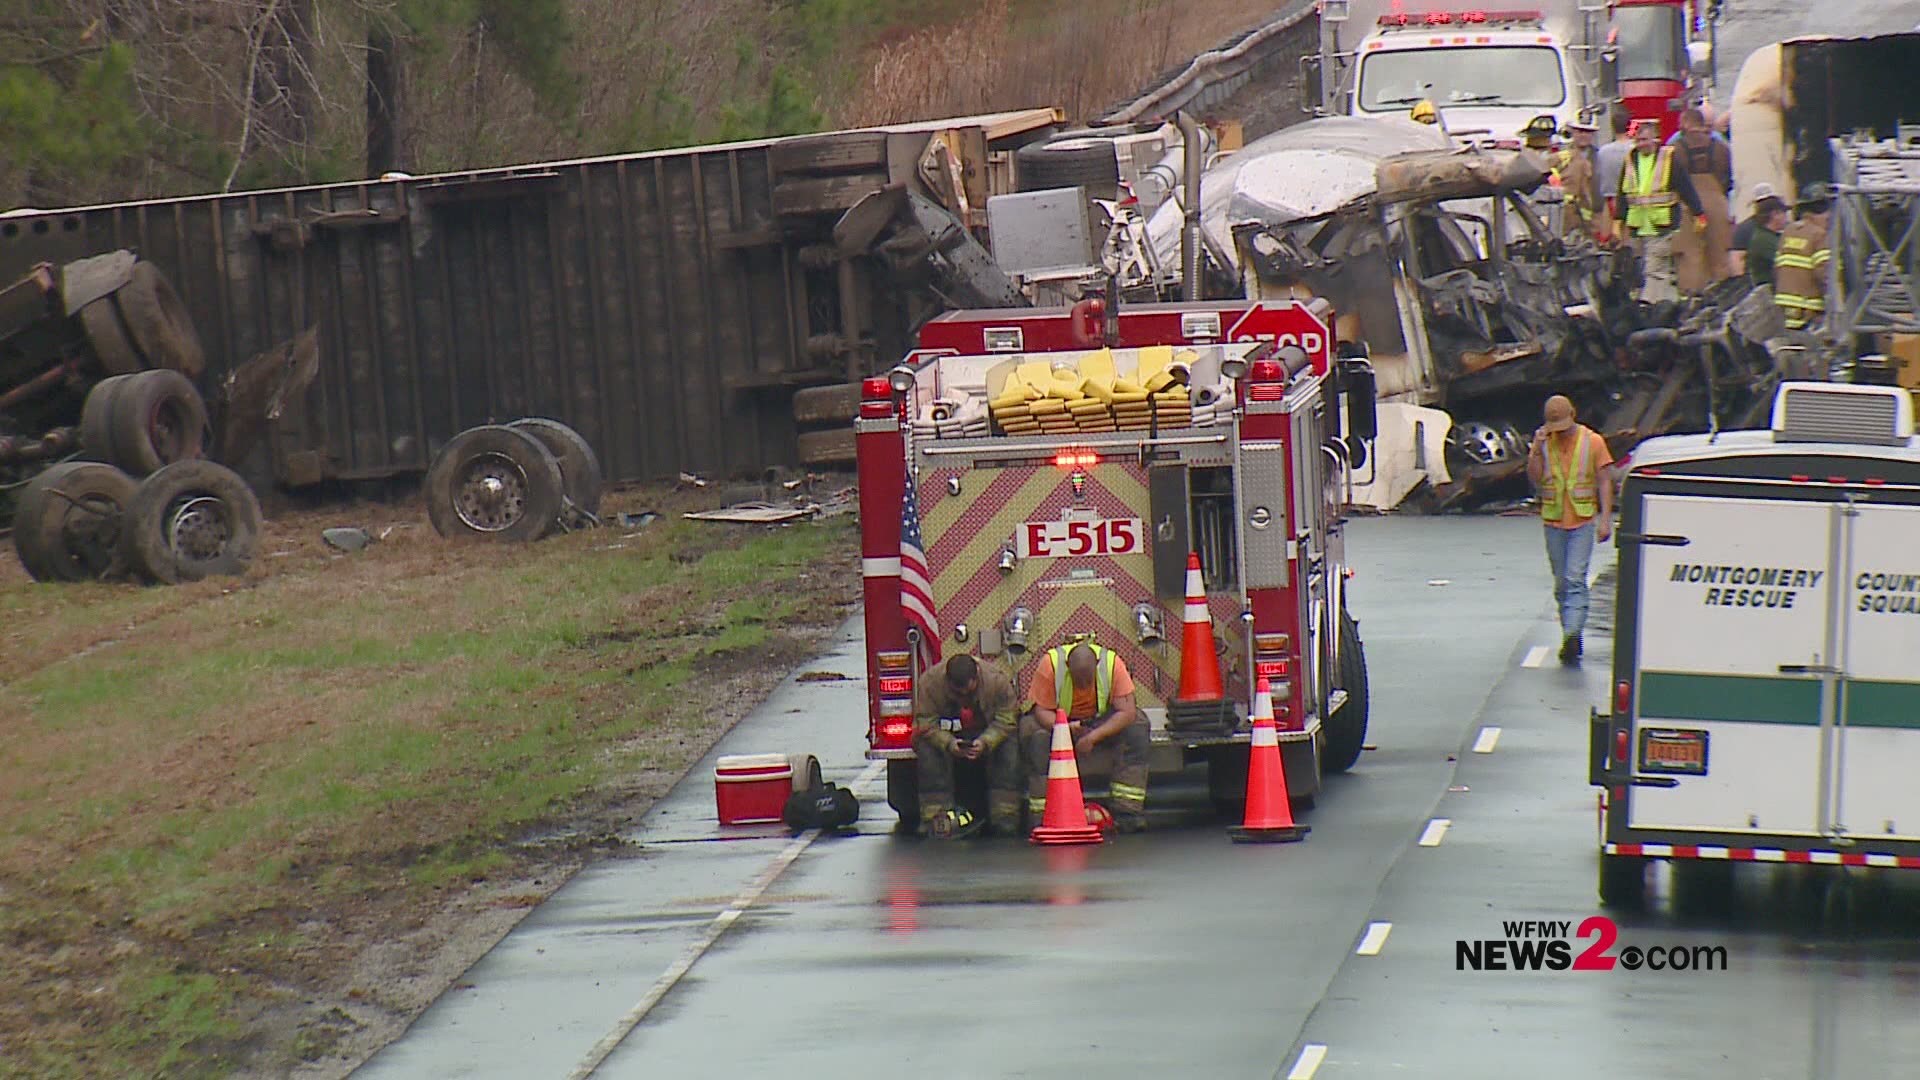 NCDOT said the southbound lanes of I-73 near Biscoe reopened nearly a day after the deadly crash.